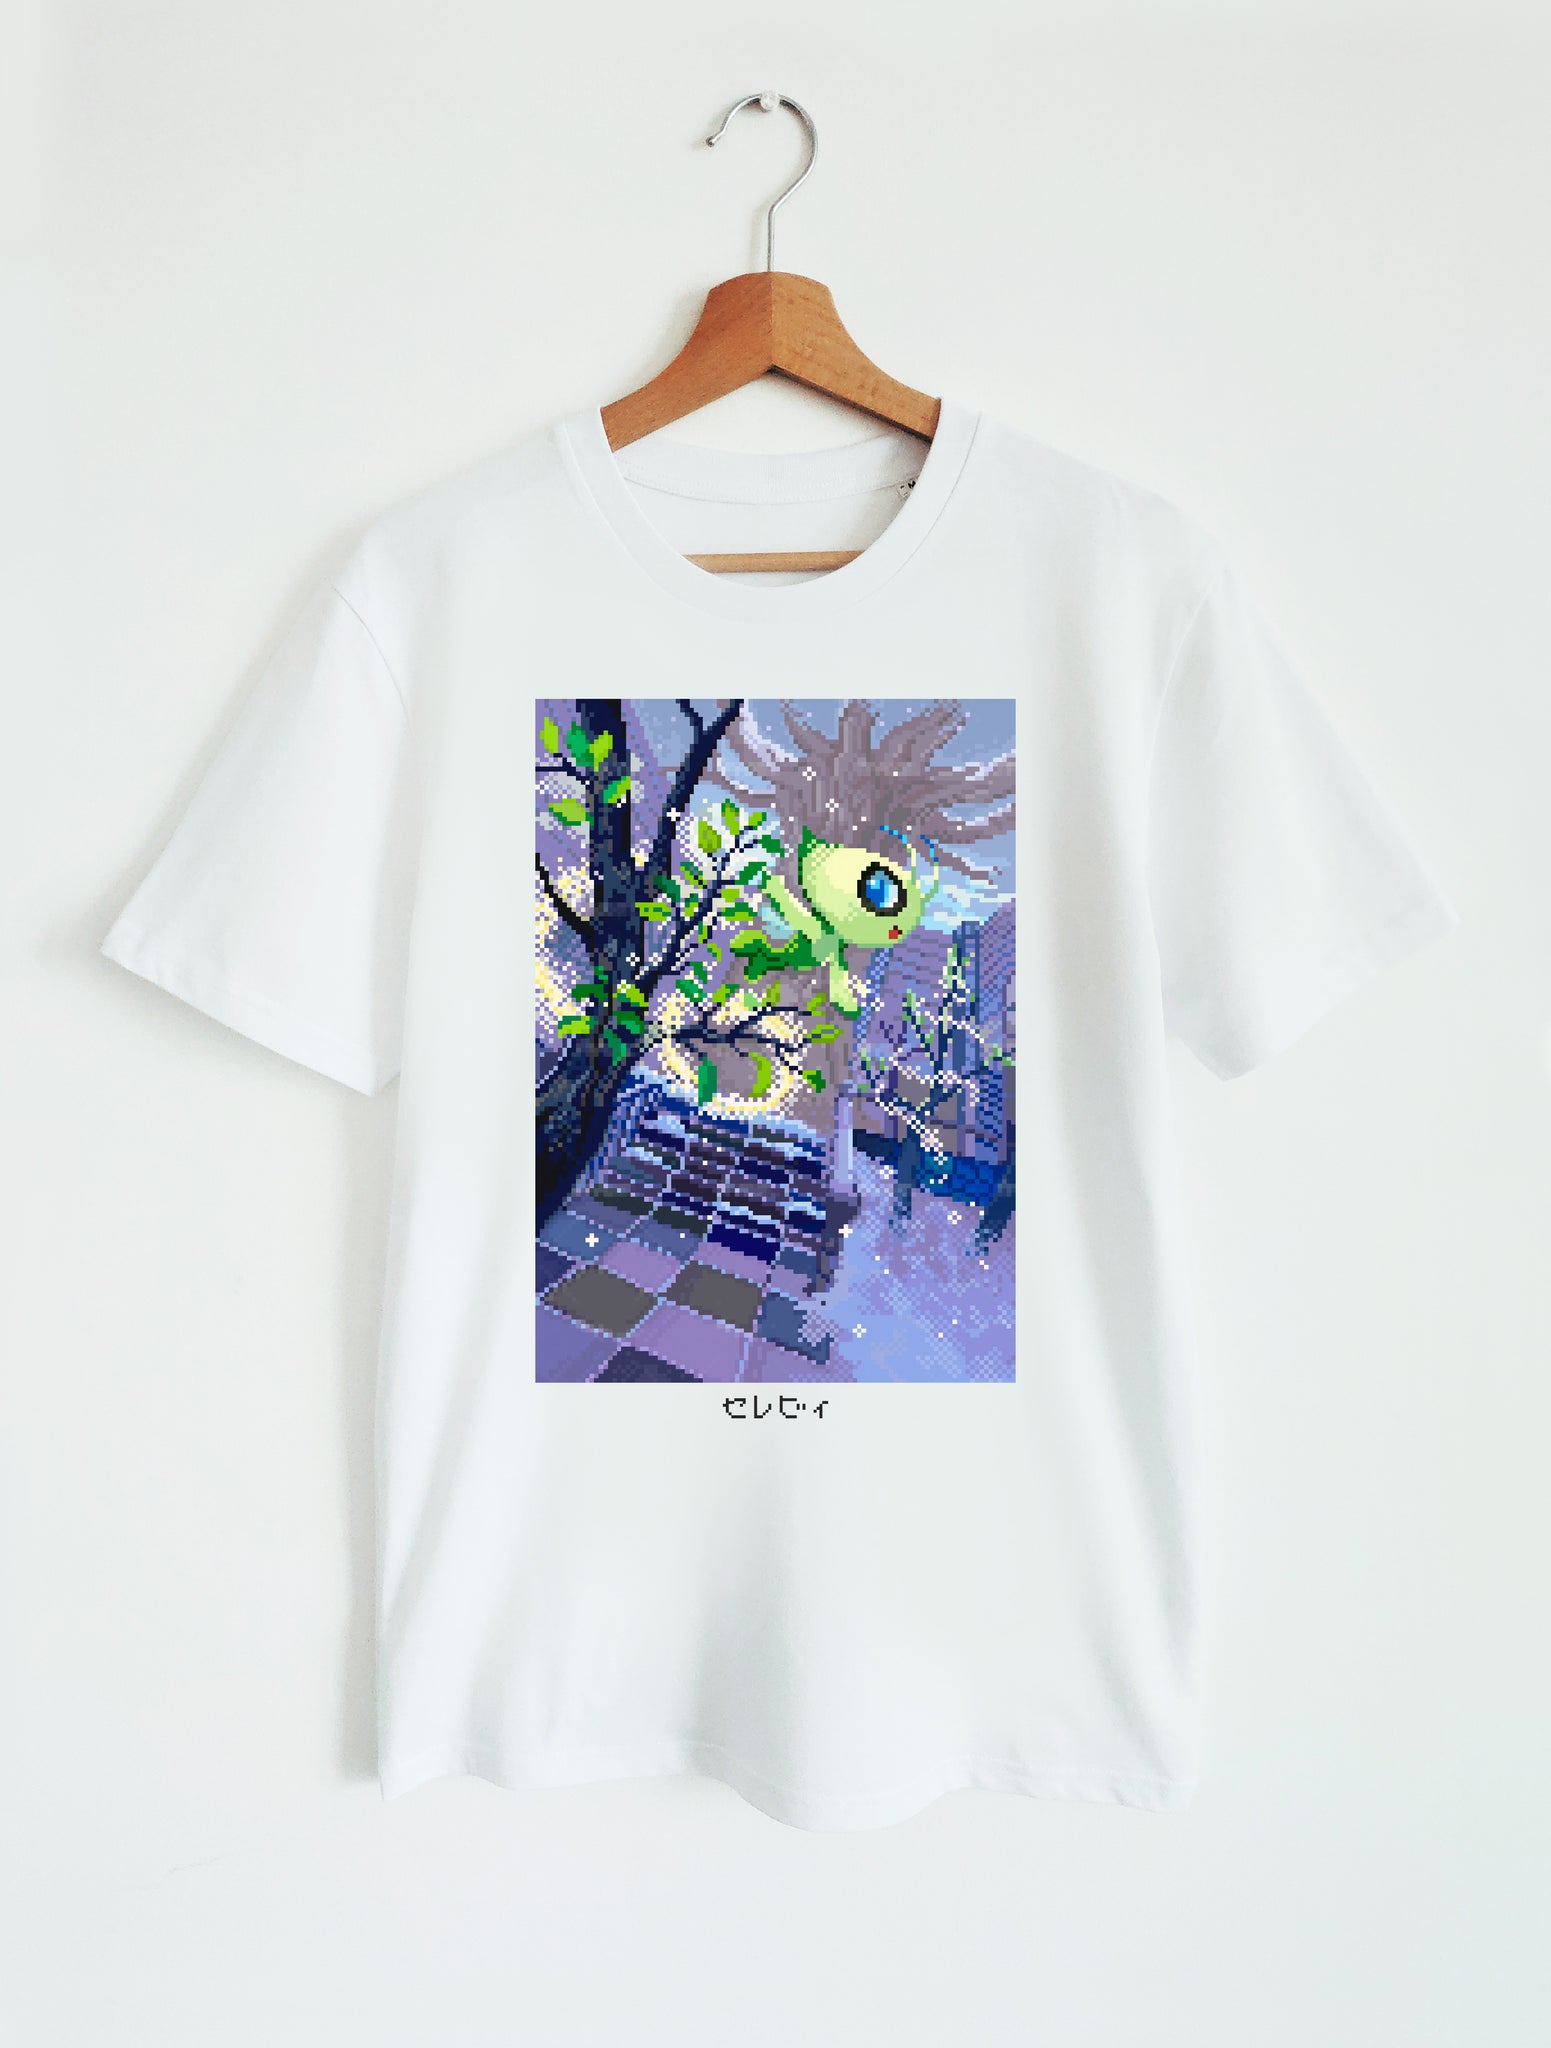 UNISEX T-SHIRT / PKM FULL ART - VOICE OF THE FOREST